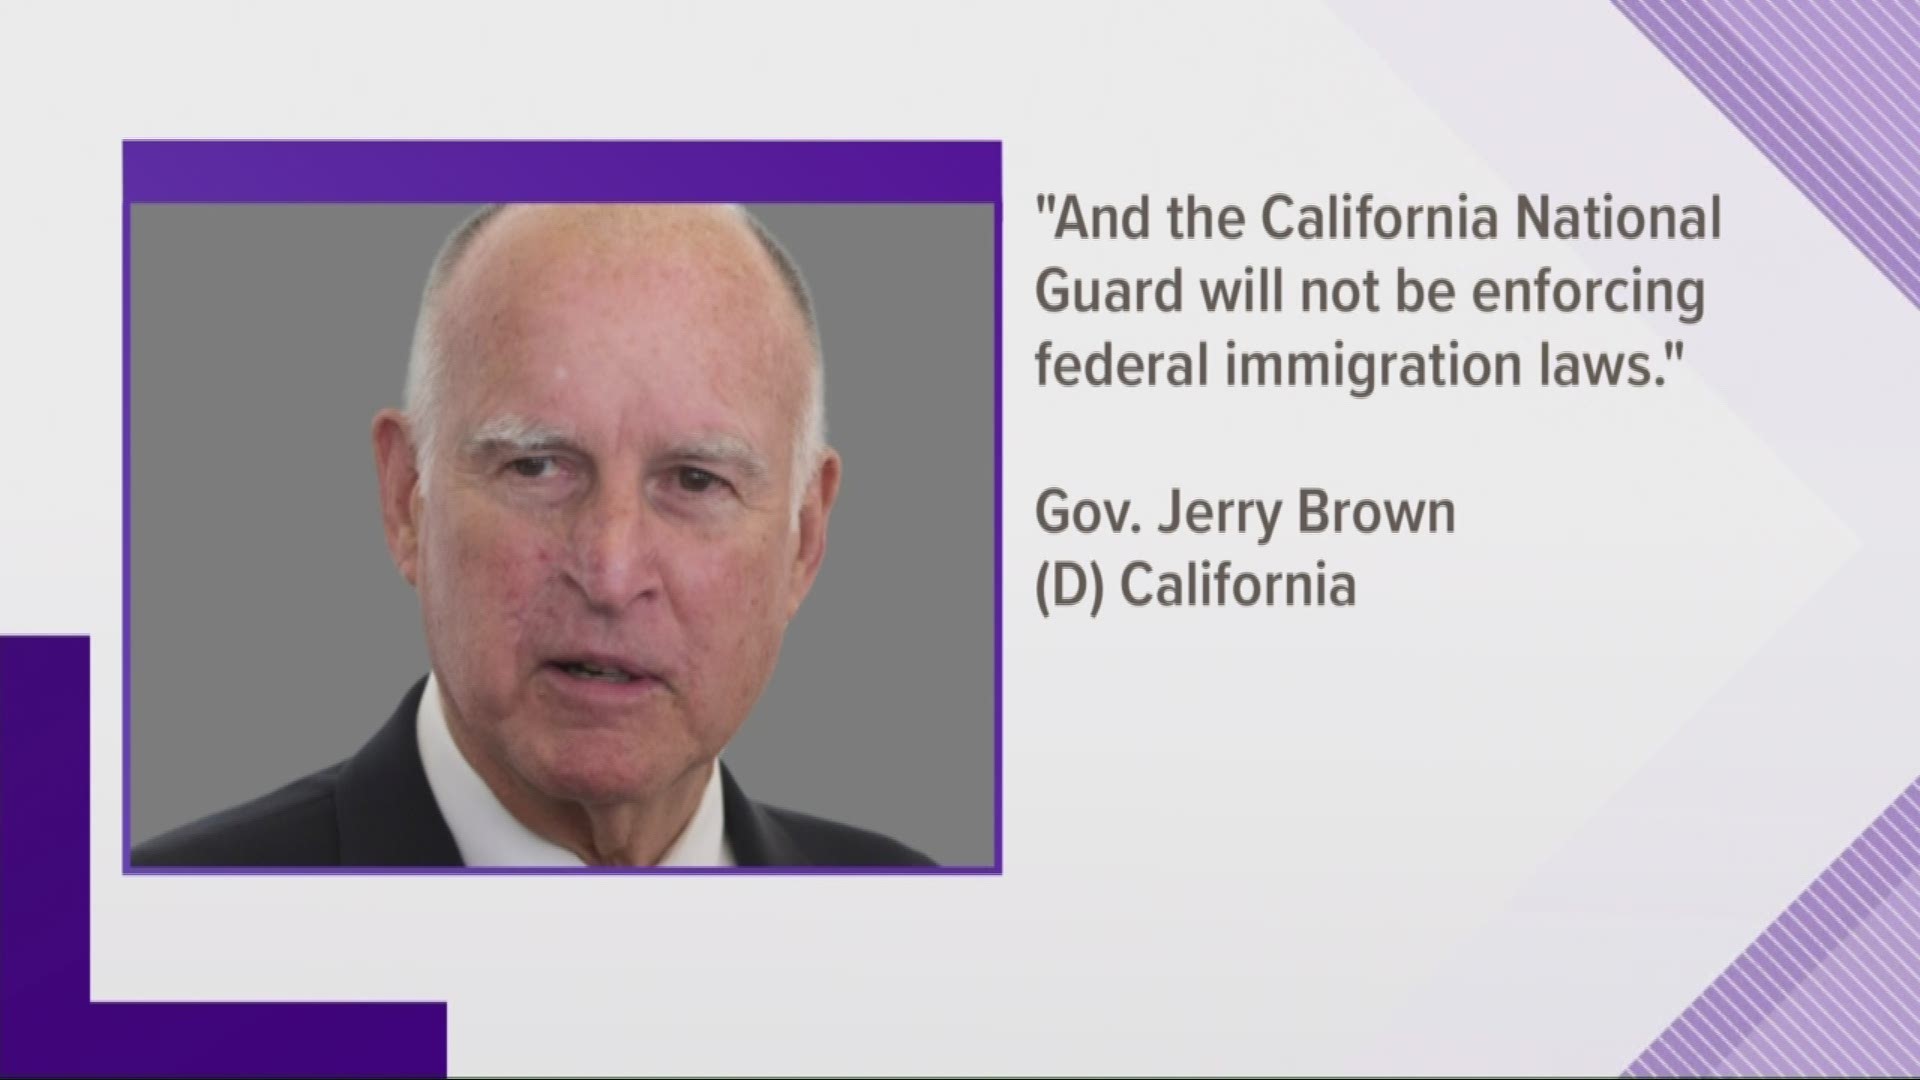 California Governor Jerry Brow made the decision to deploy 400 National Guard troops to the border. (April 11, 2018)